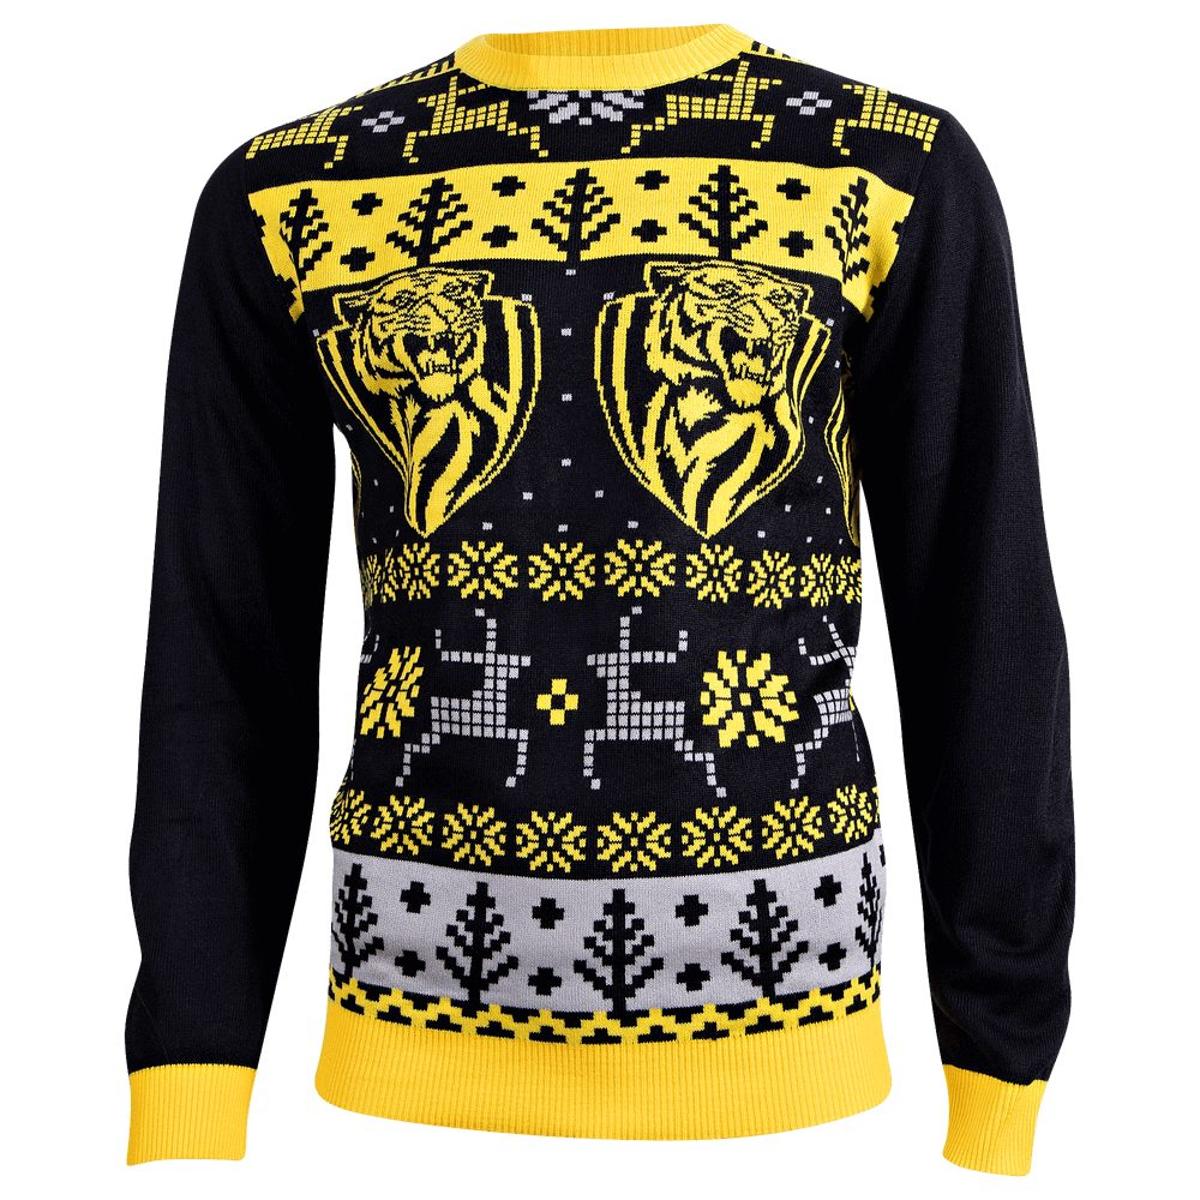 Richmond Tigers Ugly Christmas Sweater For Fans